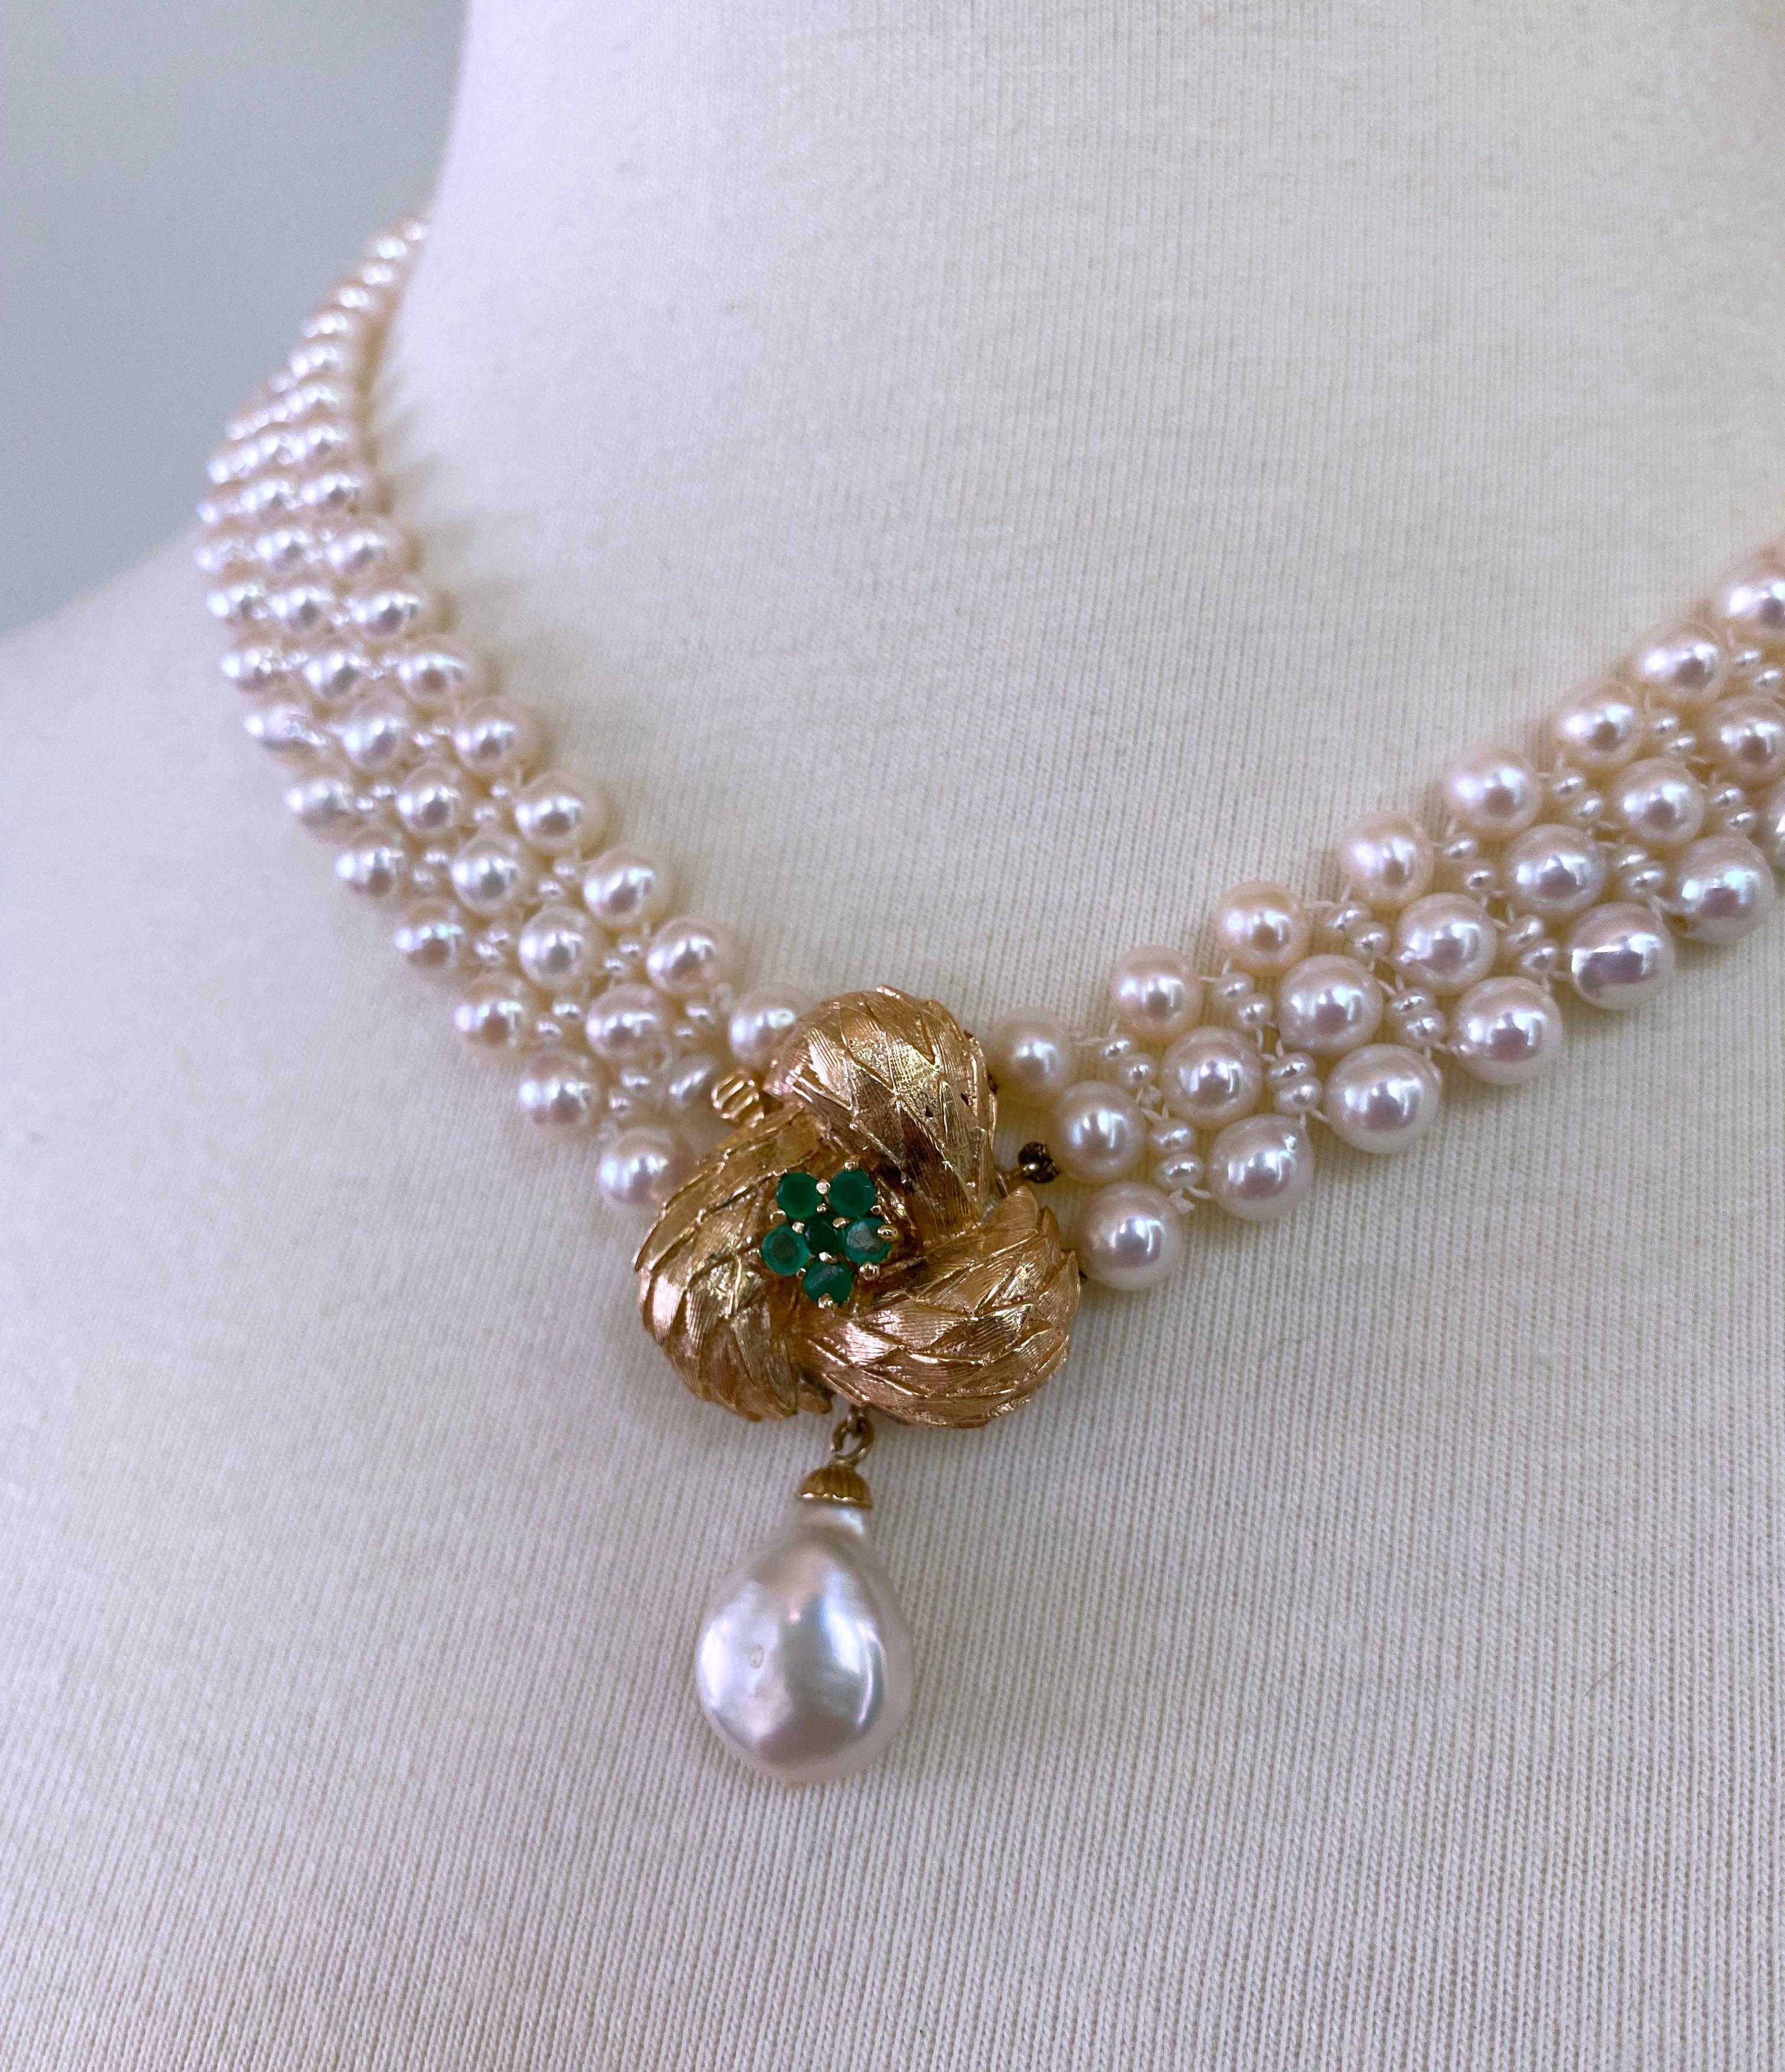 Marina J. Pearl Necklace with Vintage 14k Yellow Gold and Emerald ...